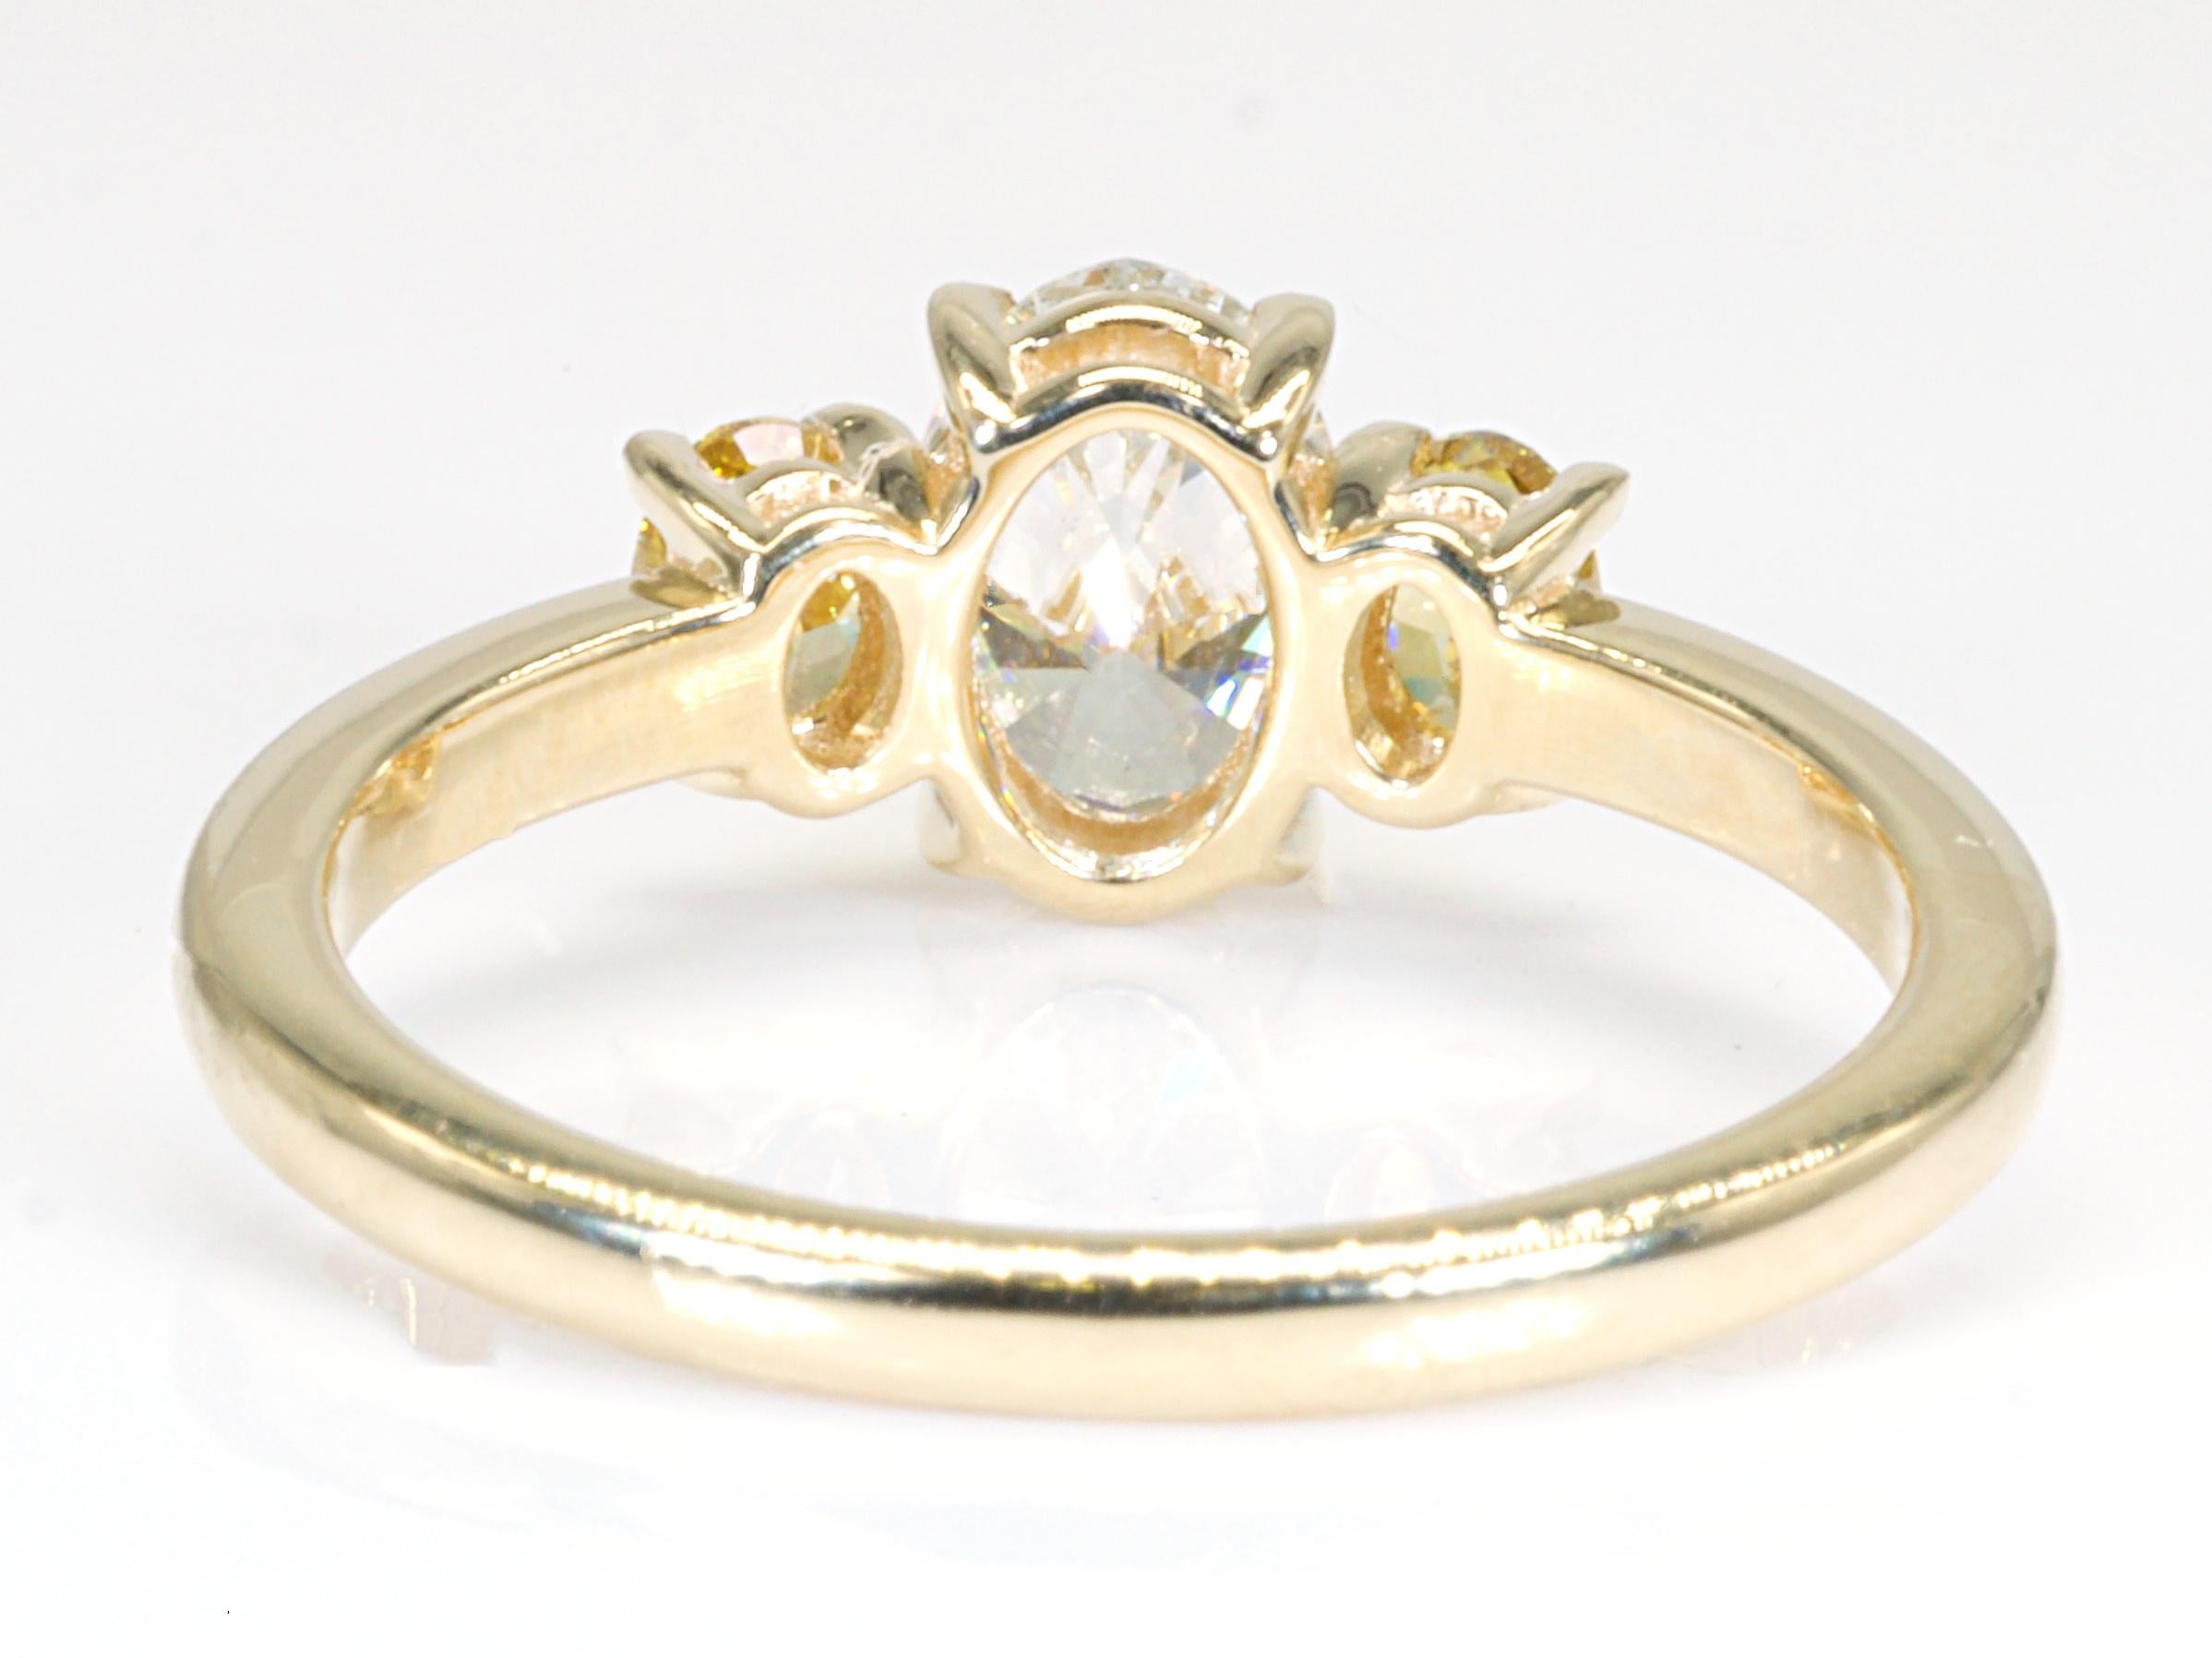 Oval Cut Elegant 18k Yellow Gold Three Stone Ring with 0.70 Ct Natural Diamonds, AIG Cert